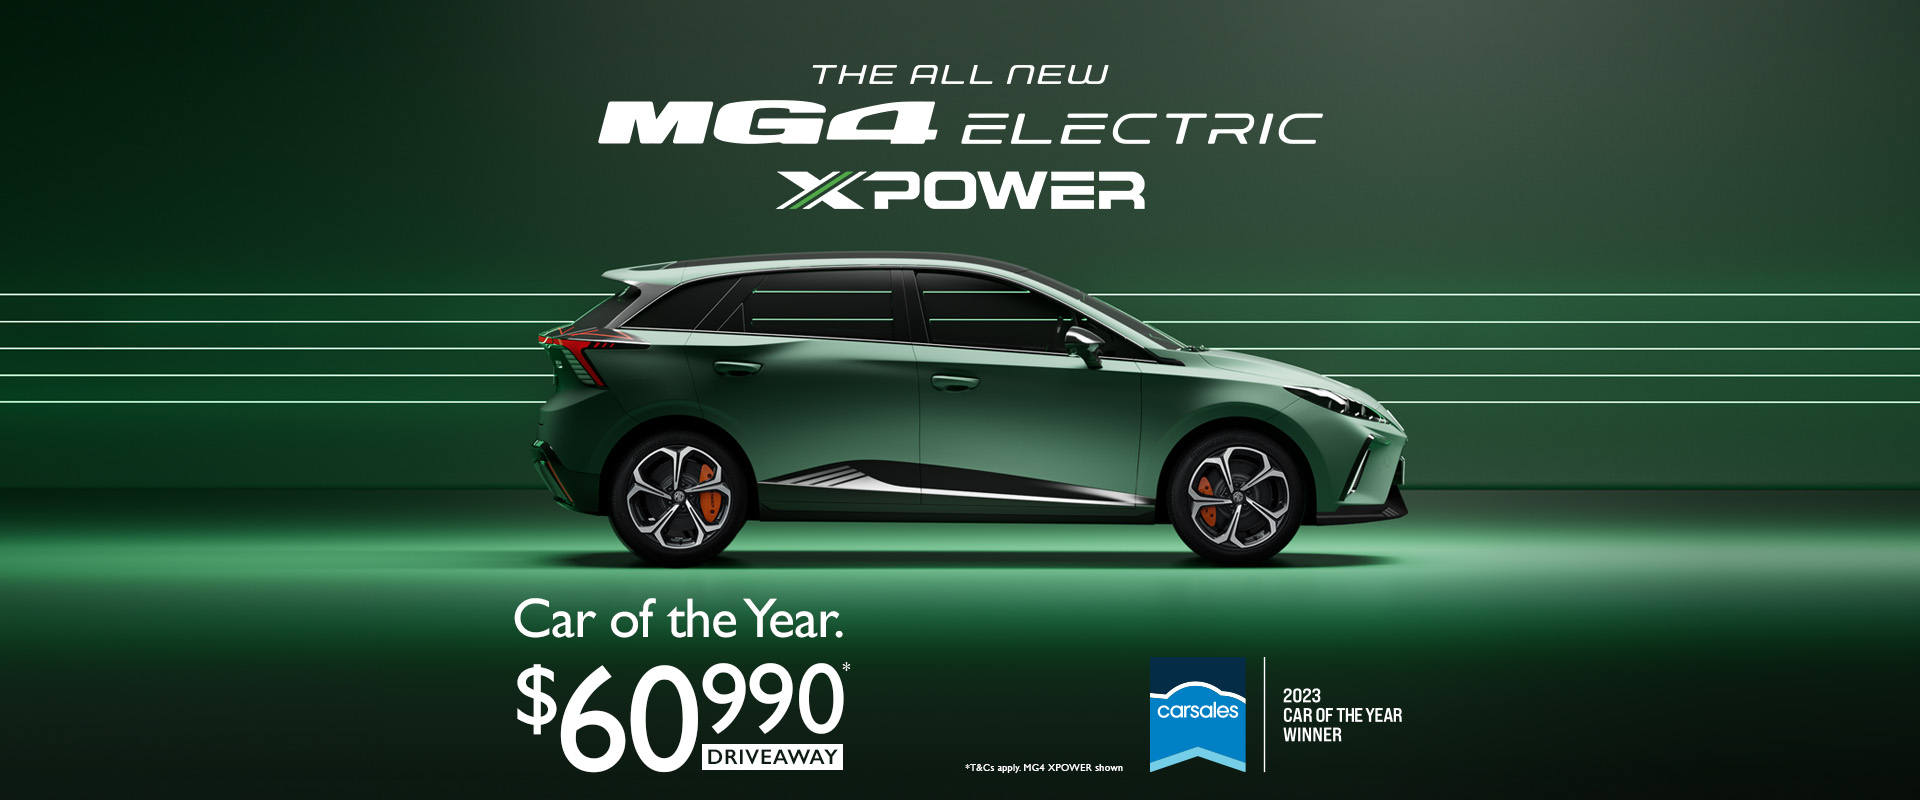 MG4 ELECTRIC XPOWER